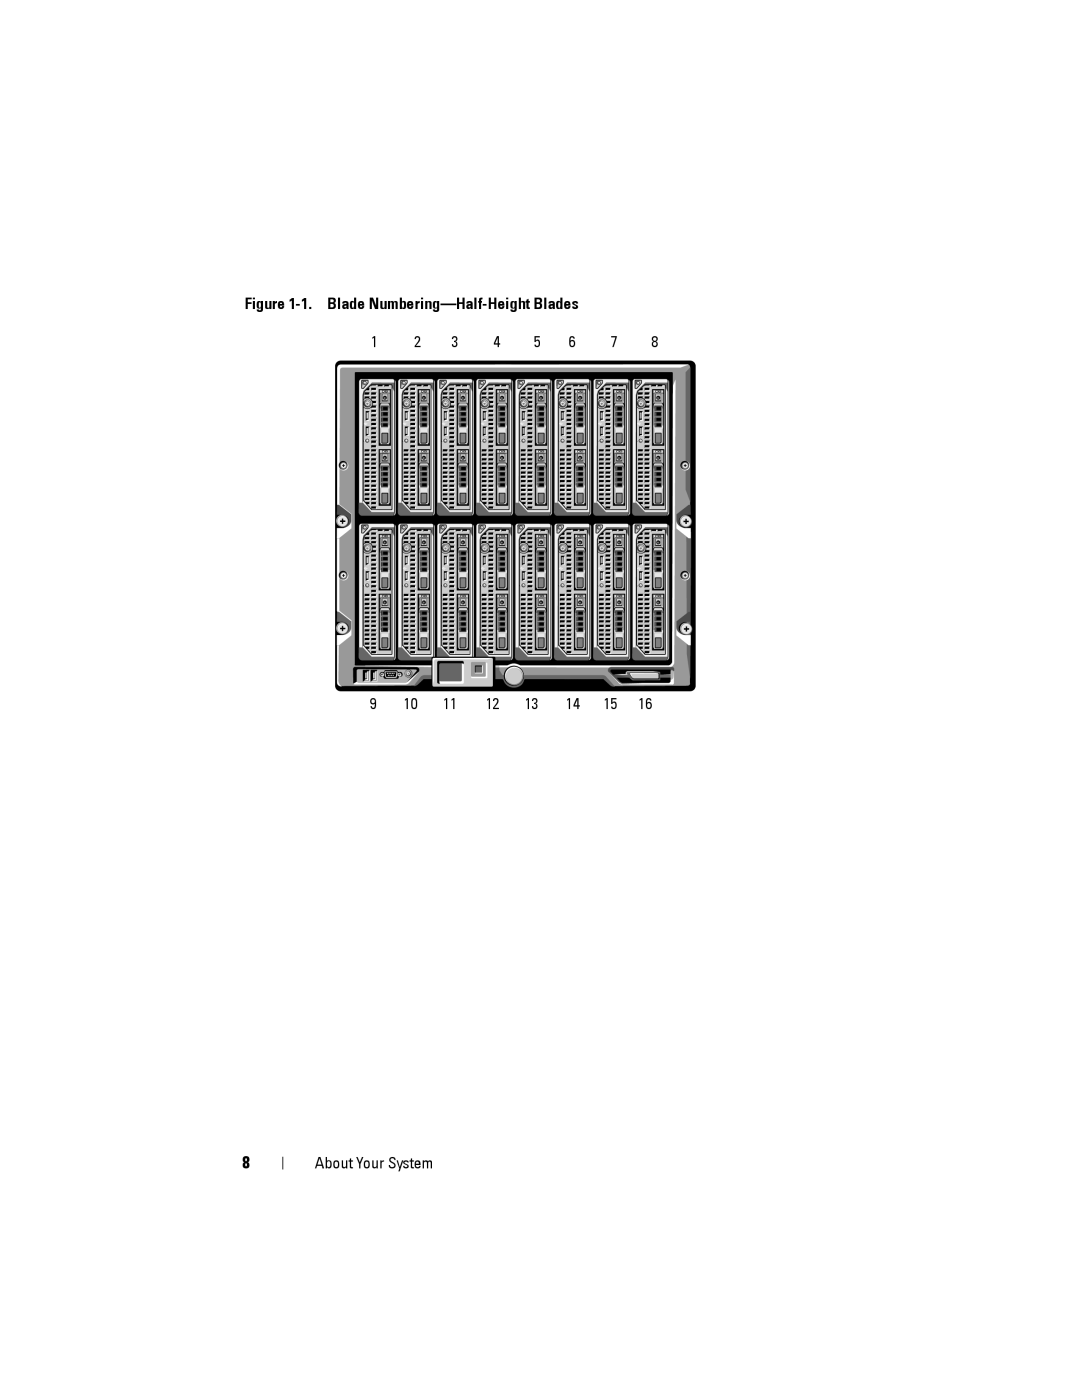 Dell M1000E manual 1. Blade Numbering-Half-Height Blades, About Your System 